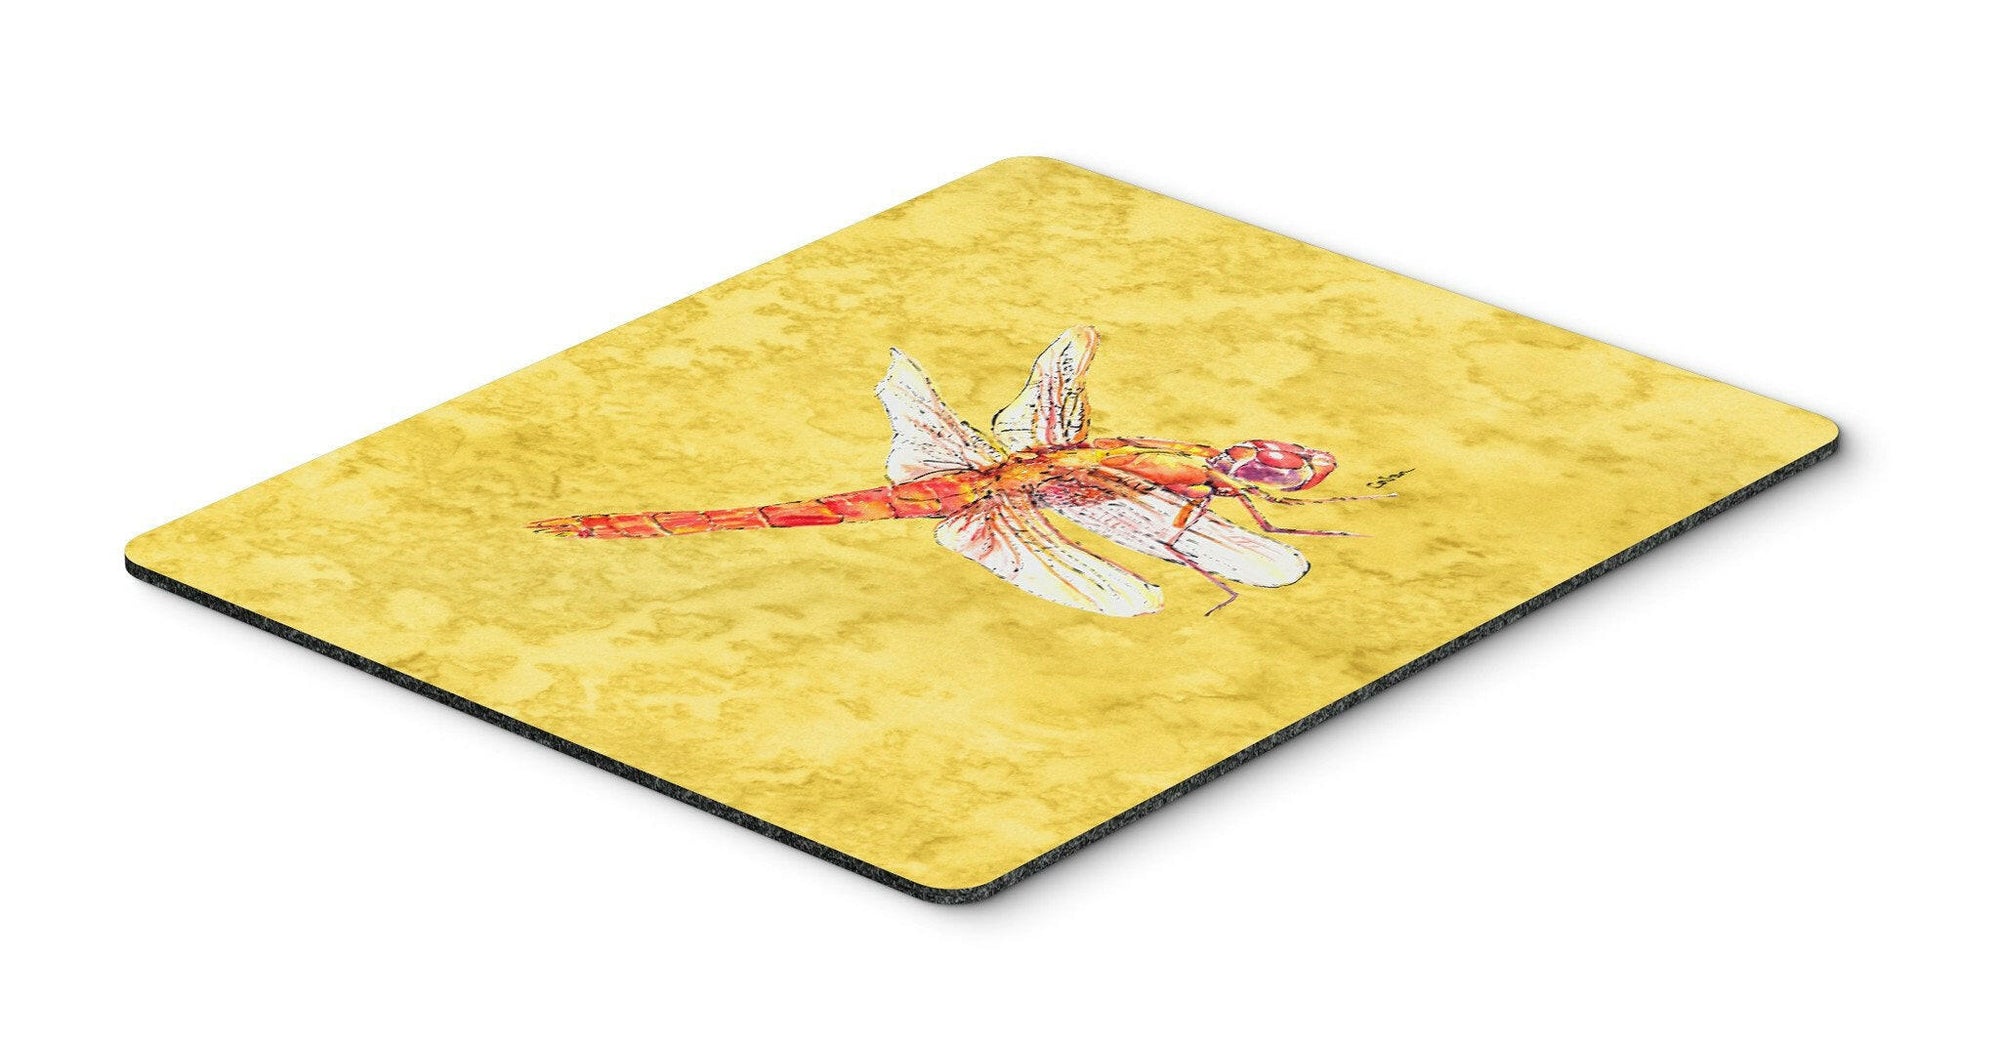 Dragonfly on Yellow Mouse Pad, Hot Pad or Trivet by Caroline's Treasures